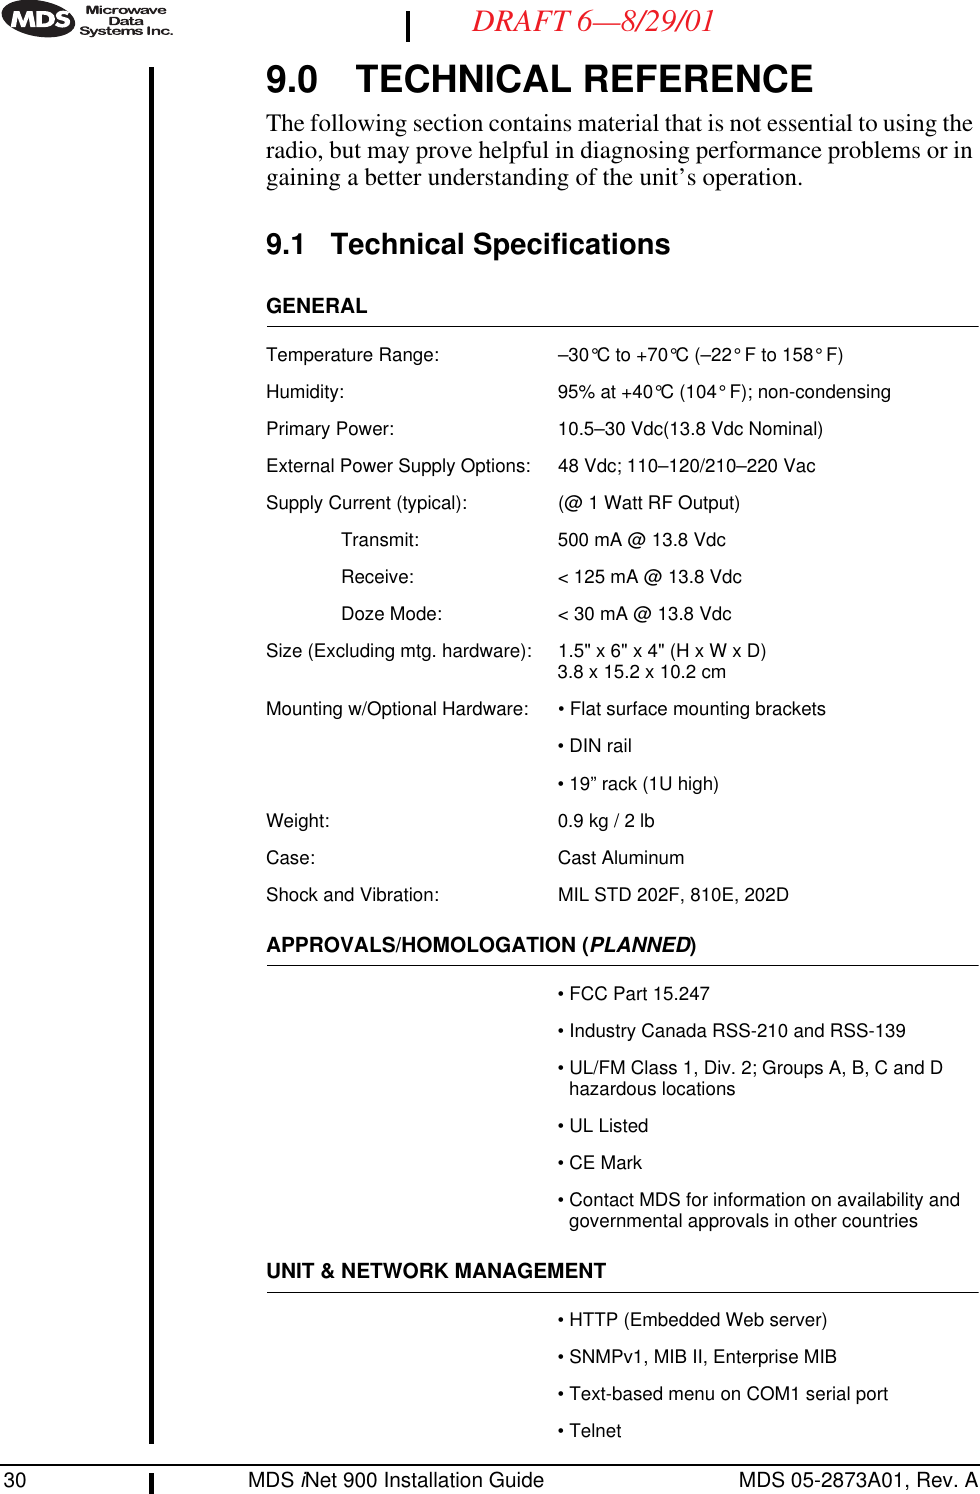 30 MDS iNet 900 Installation Guide MDS 05-2873A01, Rev. ADRAFT 6—8/29/019.0 TECHNICAL REFERENCEThe following section contains material that is not essential to using the radio, but may prove helpful in diagnosing performance problems or in gaining a better understanding of the unit’s operation.9.1 Technical SpecificationsGENERALTemperature Range: –30°C to +70°C (–22° F to 158° F)Humidity: 95% at +40°C (104° F); non-condensingPrimary Power: 10.5–30 Vdc(13.8 Vdc Nominal)External Power Supply Options: 48 Vdc; 110–120/210–220 VacSupply Current (typical): (@ 1 Watt RF Output)Transmit: 500 mA @ 13.8 VdcReceive: &lt; 125 mA @ 13.8 VdcDoze Mode: &lt; 30 mA @ 13.8 VdcSize (Excluding mtg. hardware): 1.5&quot; x 6&quot; x 4&quot; (H x W x D)3.8 x 15.2 x 10.2 cmMounting w/Optional Hardware: • Flat surface mounting brackets• DIN rail• 19” rack (1U high)Weight: 0.9 kg / 2 lbCase: Cast AluminumShock and Vibration: MIL STD 202F, 810E, 202DAPPROVALS/HOMOLOGATION (PLANNED)• FCC Part 15.247• Industry Canada RSS-210 and RSS-139• UL/FM Class 1, Div. 2; Groups A, B, C and D hazardous locations• UL Listed• CE Mark• Contact MDS for information on availability and governmental approvals in other countriesUNIT &amp; NETWORK MANAGEMENT• HTTP (Embedded Web server)• SNMPv1, MIB II, Enterprise MIB• Text-based menu on COM1 serial port• Telnet